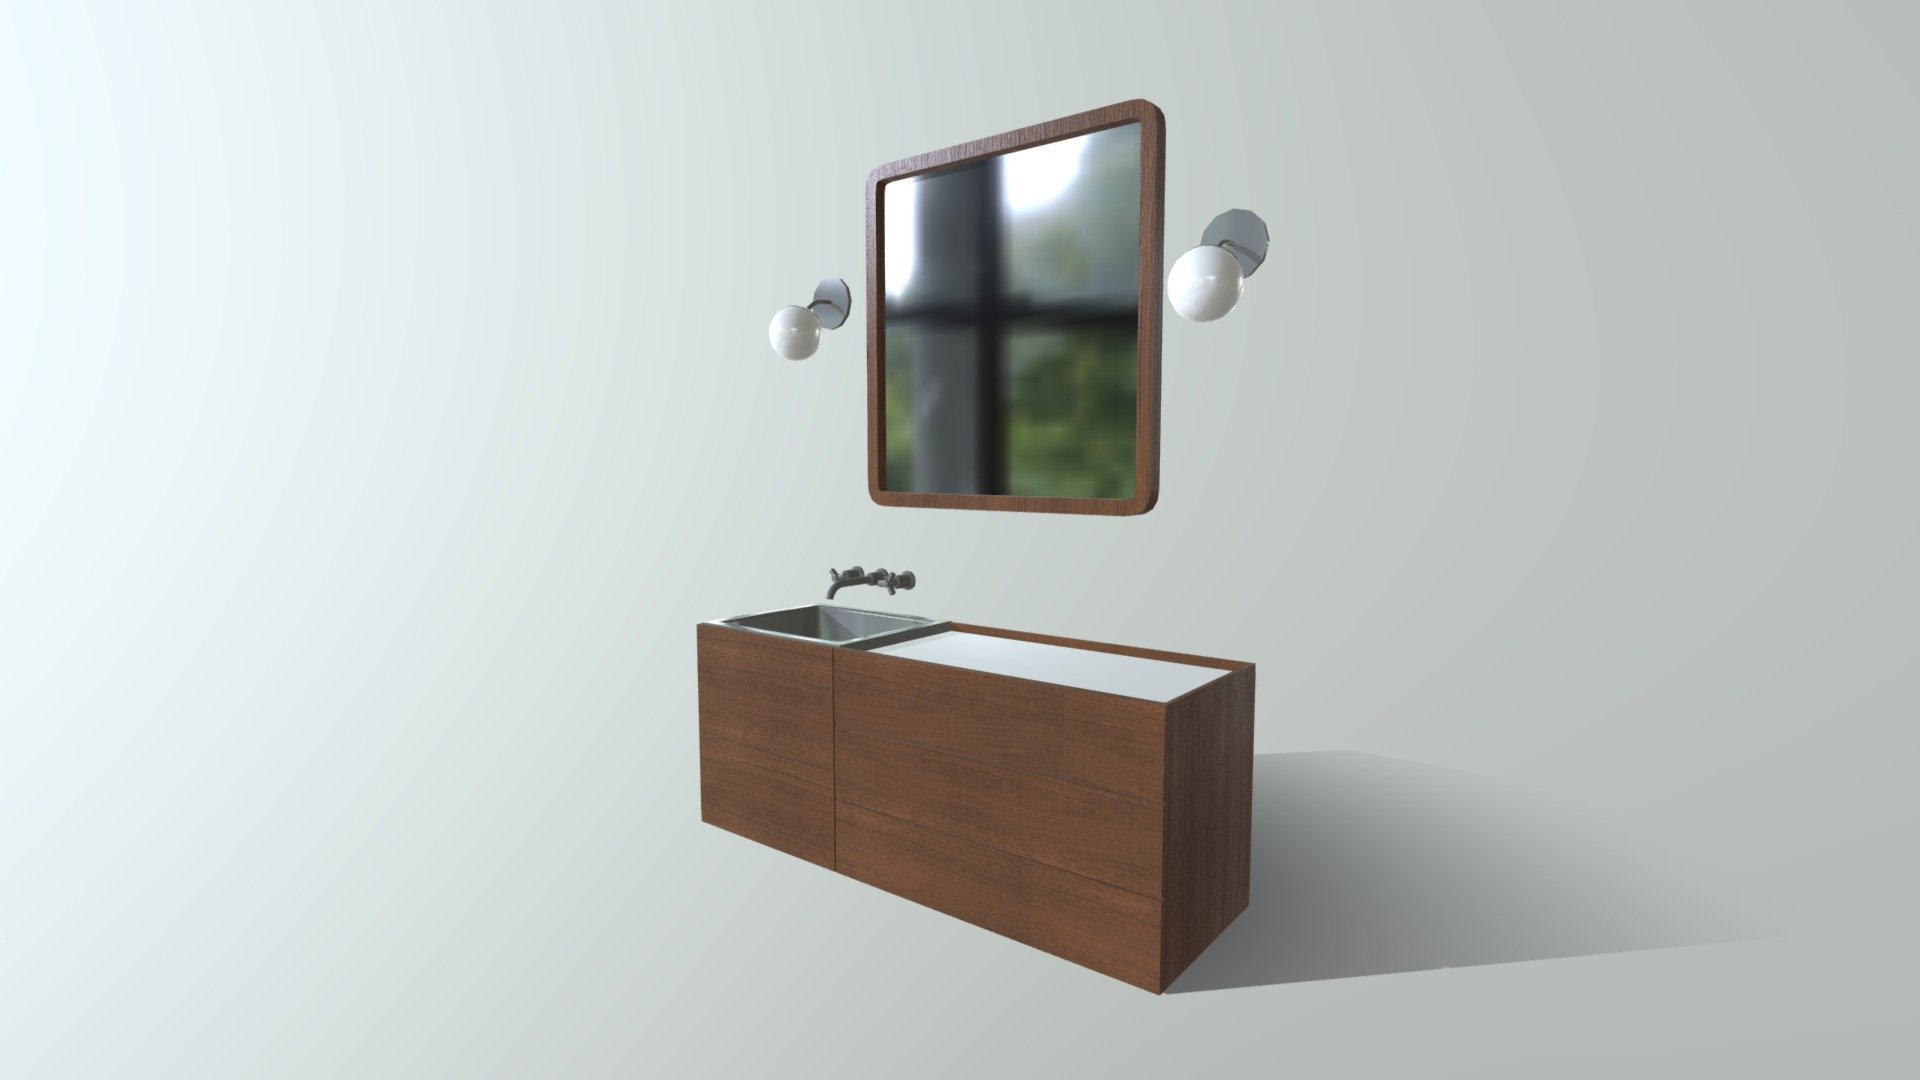 Modeled for RE4L - Real Estate for All. 08/2018

STYLE: Scandinavian

MODEL: Bathroom Sink 01

SOFTWARE: 3ds Max 2017

DESIGNER: Lucas Bender

SUPPORT: Ruan Sampaio

All rights reserved to Visual Media Content - visualmediacontent.com - Bathroom Sink S1M1 - Buy Royalty Free 3D model by Visual Media Content (@vmc) 3d model